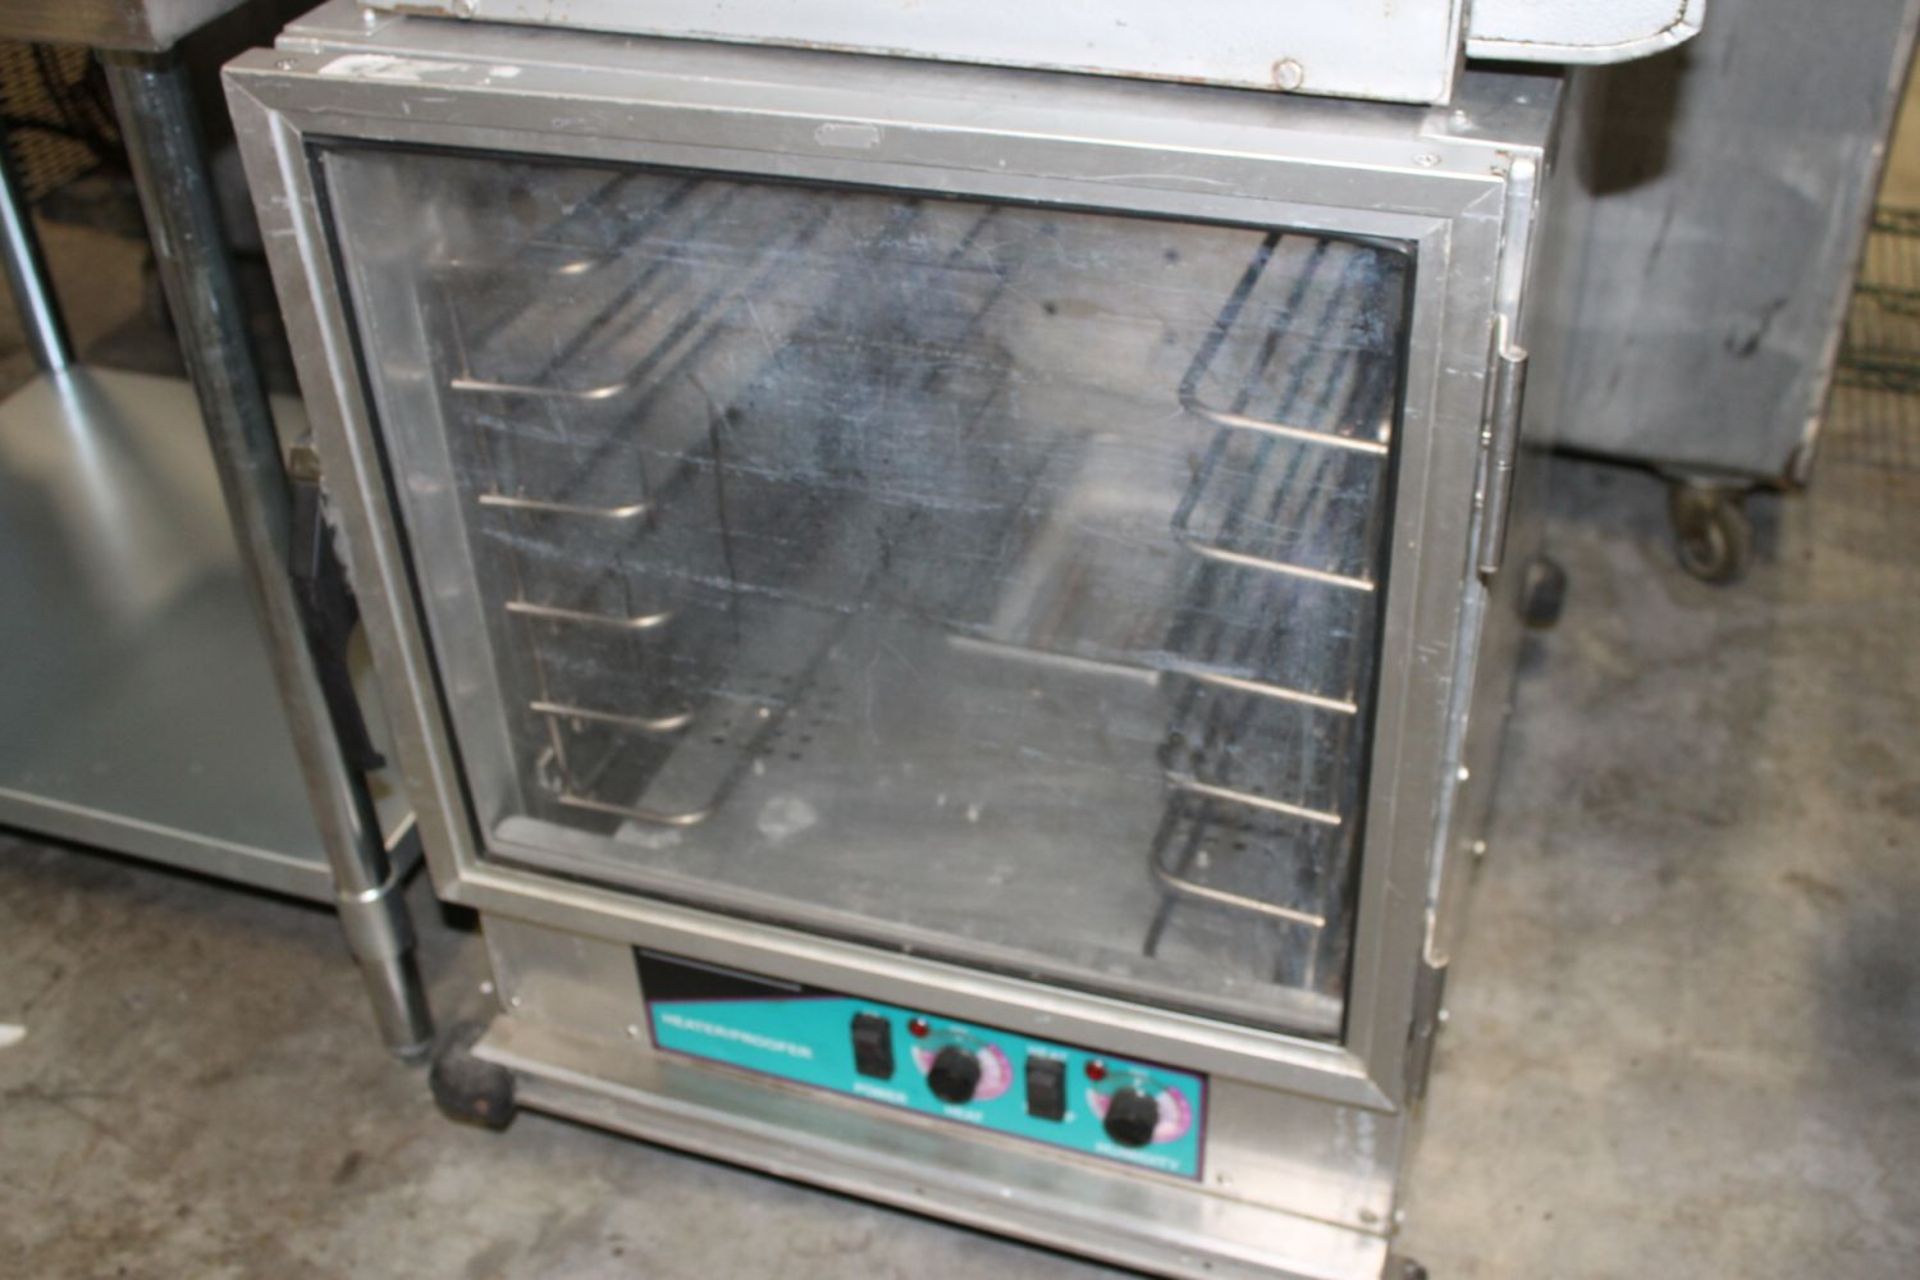 Toastmaster 1/2 Size Heater / Proofer